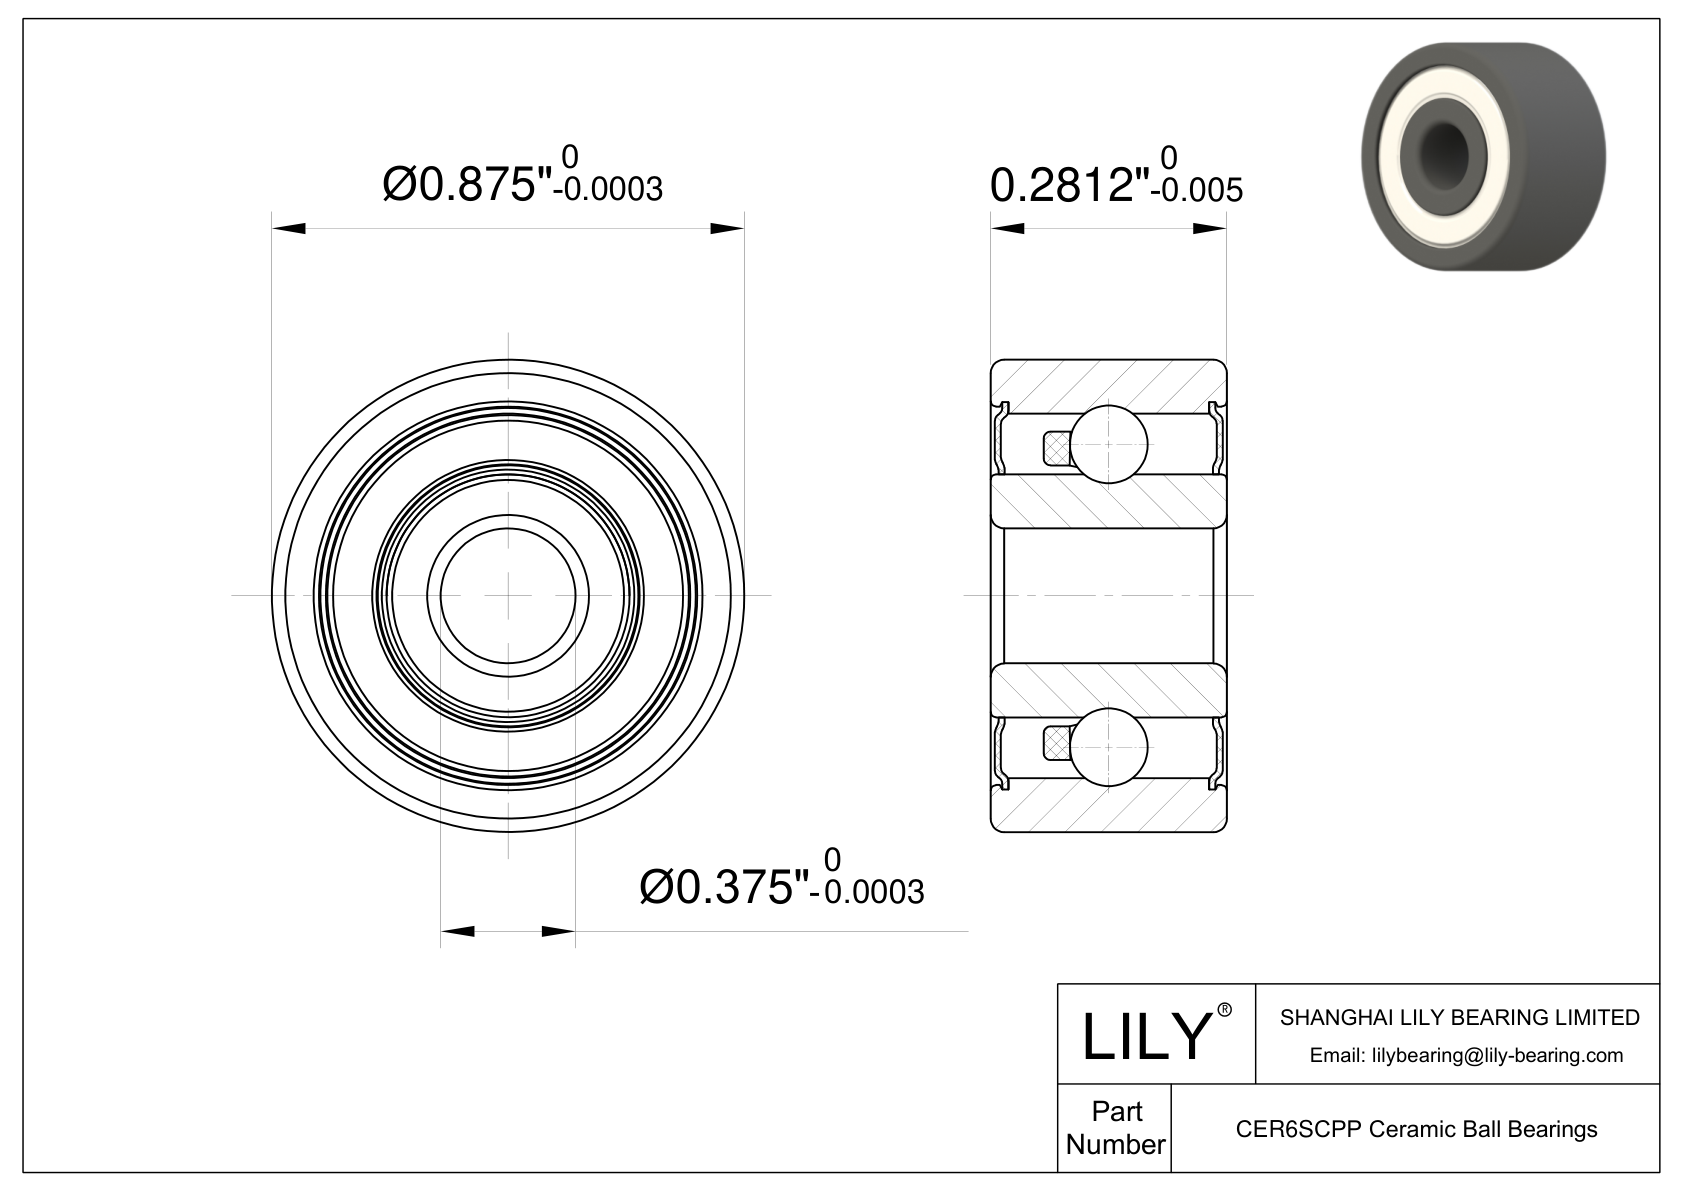 CESC R6 2RS Inch Size Silicon Carbide Ceramic Bearings cad drawing